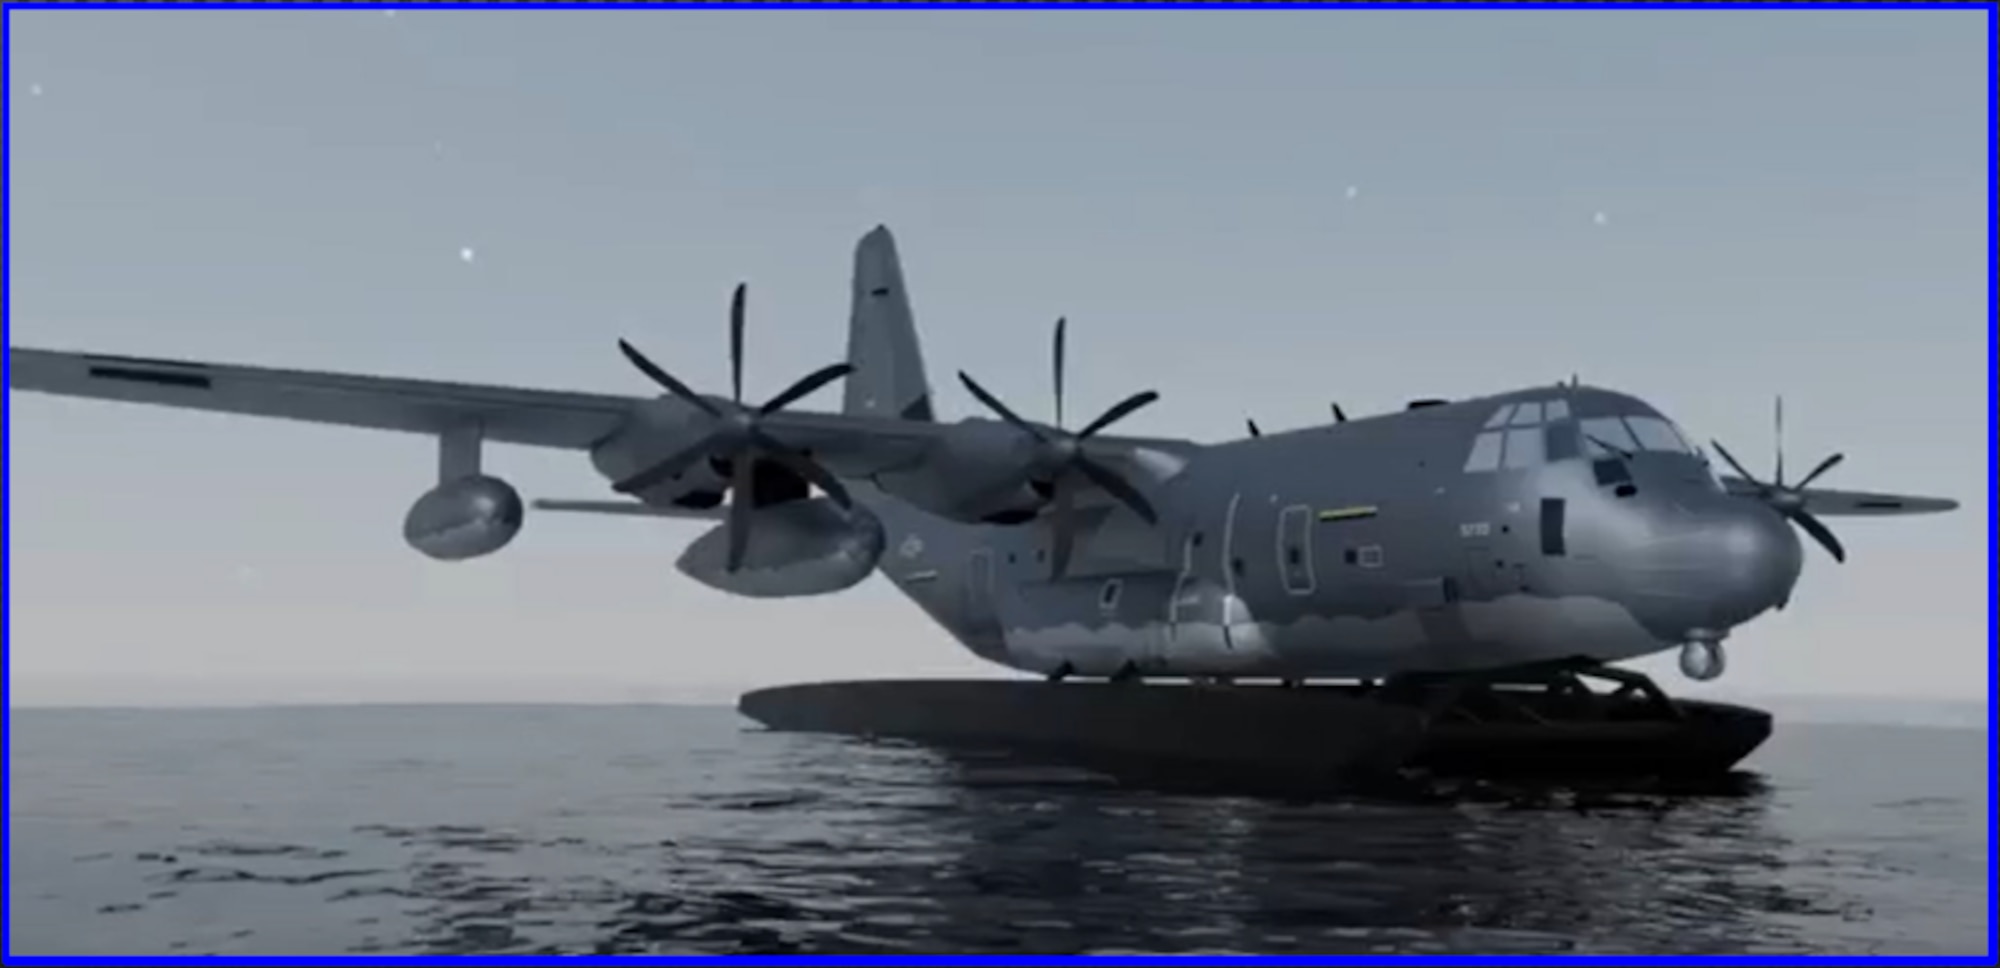 A rendering of a twin float amphibious modification to an MC-130J Commando II is shown here. Air Force Special Operations Command and private sector counterparts are currently developing a Removable Amphibious Float Modification (RAFM) for the MC-130J, allowing aircraft to take off and land in bodies of water and conduct runway independent operations. (Courtesy photo)